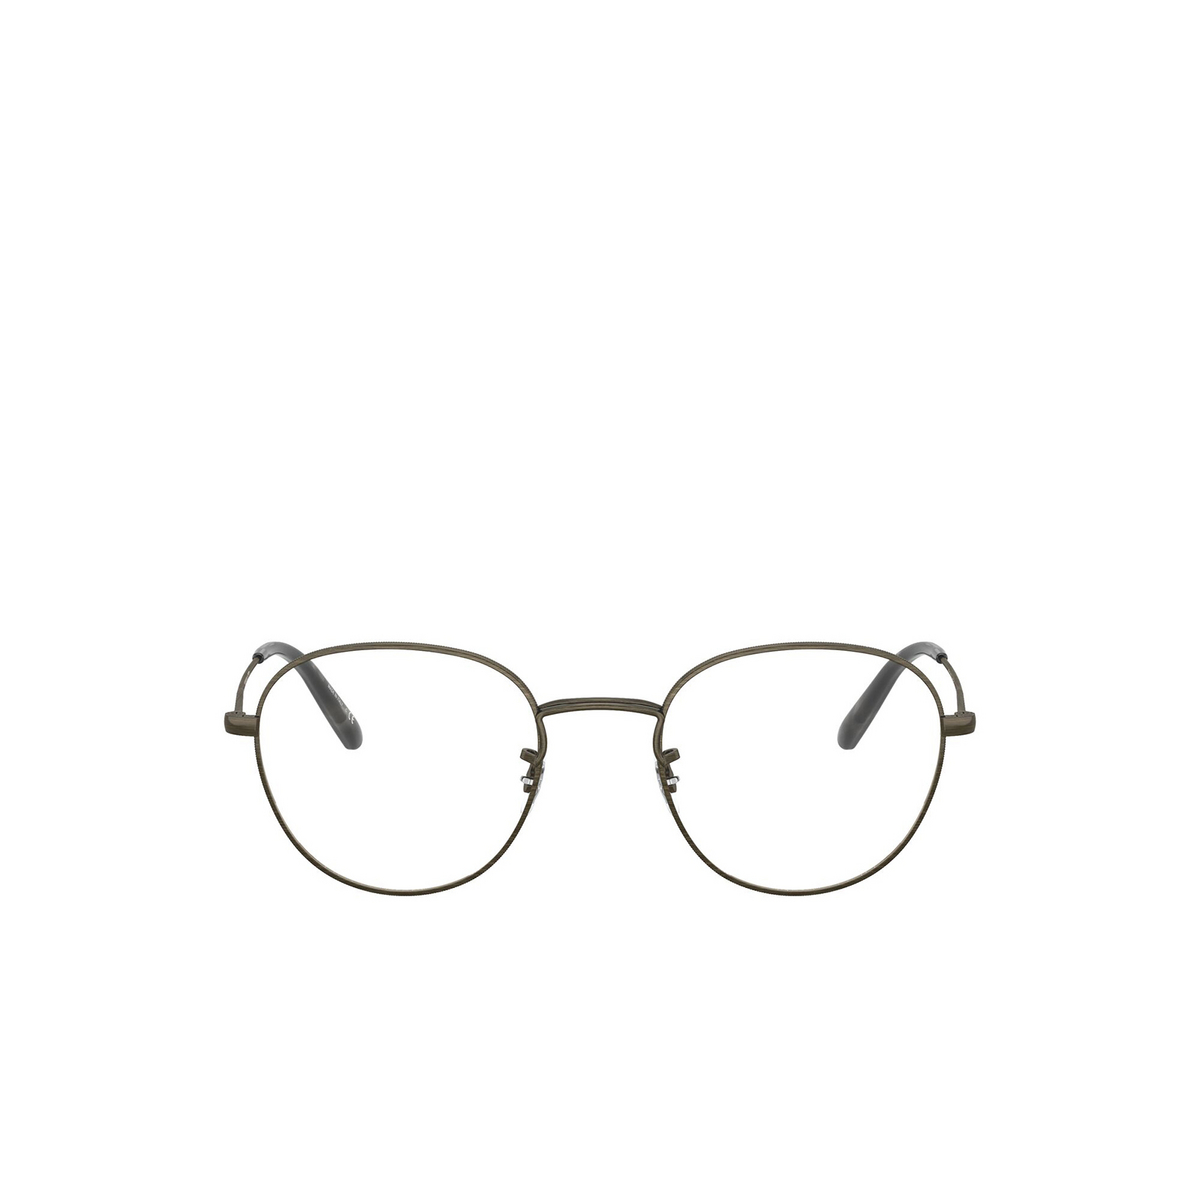 Oliver Peoples® Round Eyeglasses: Piercy OV1281 color Antique Pewter 5289 - 1/3.